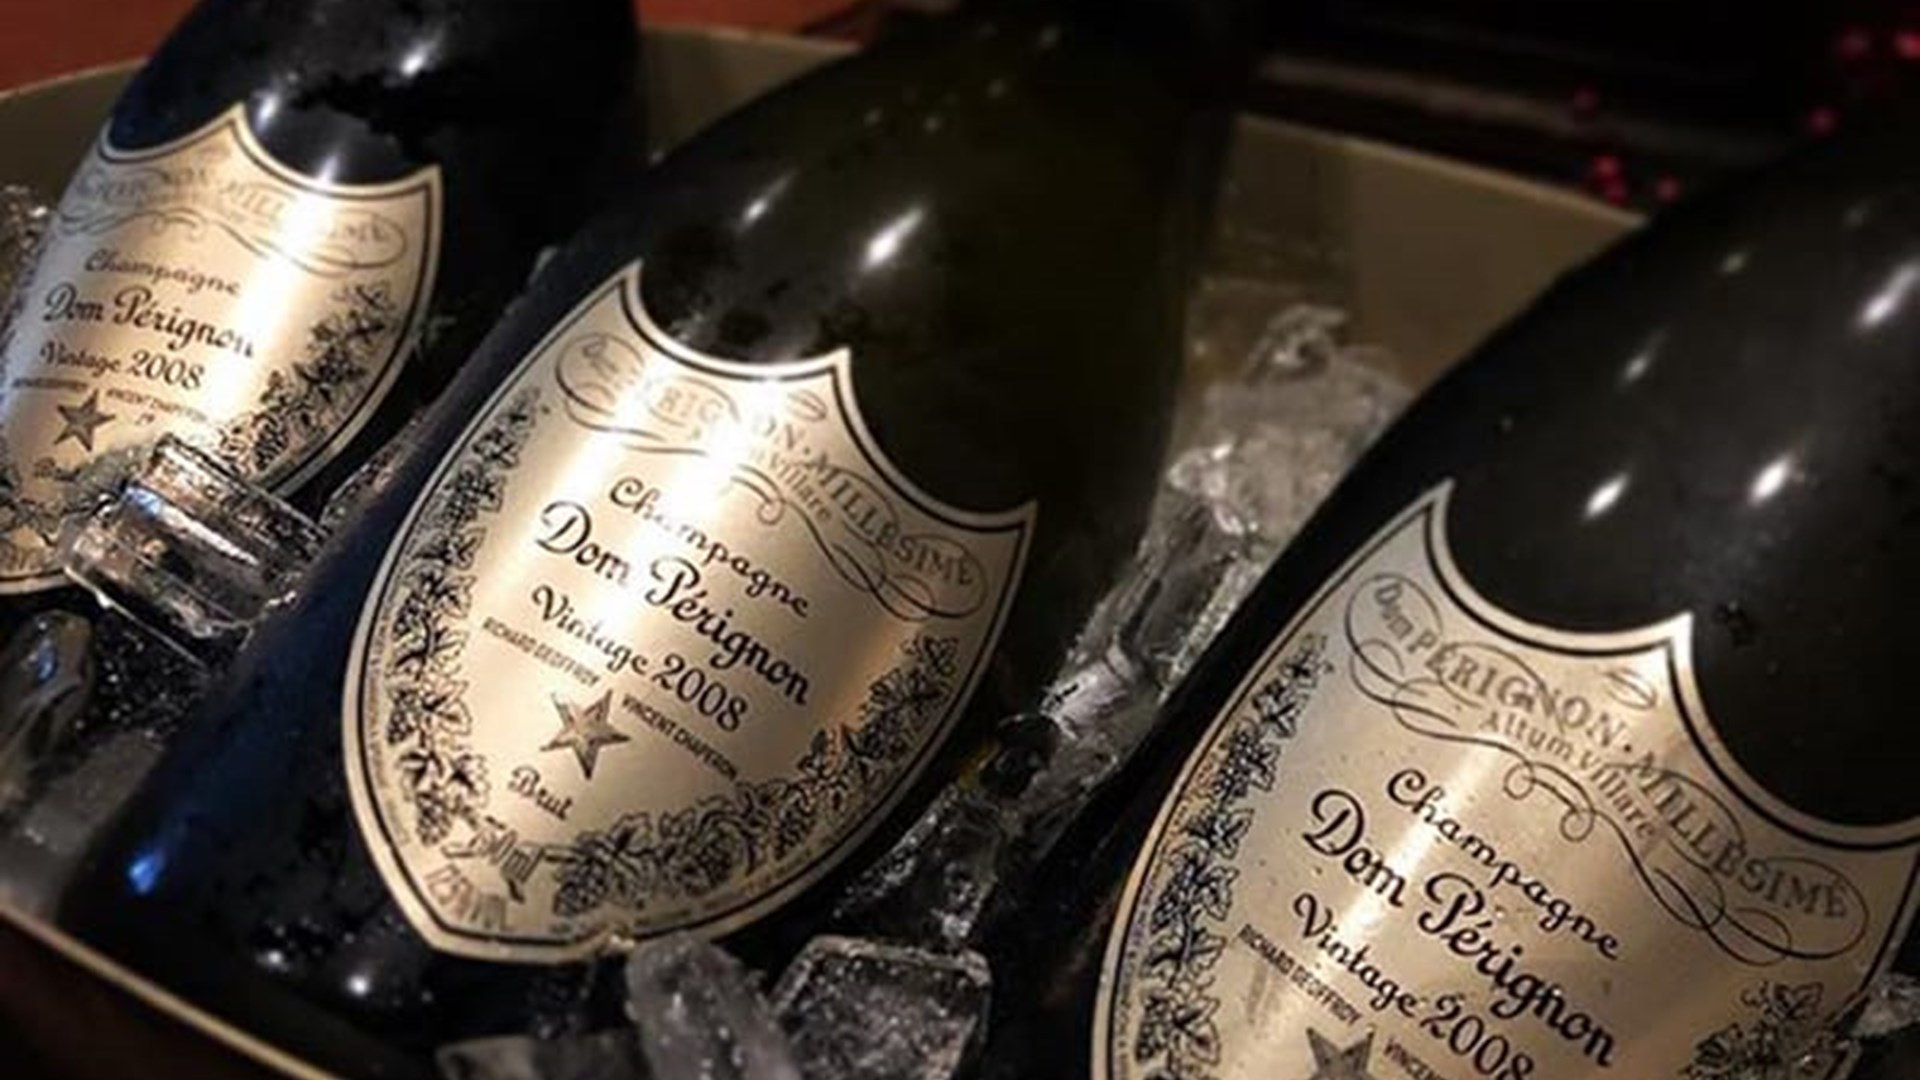 Dom Pérignon is one of the most recognizable brands in the wine world and is produced by Moët & Chandon.